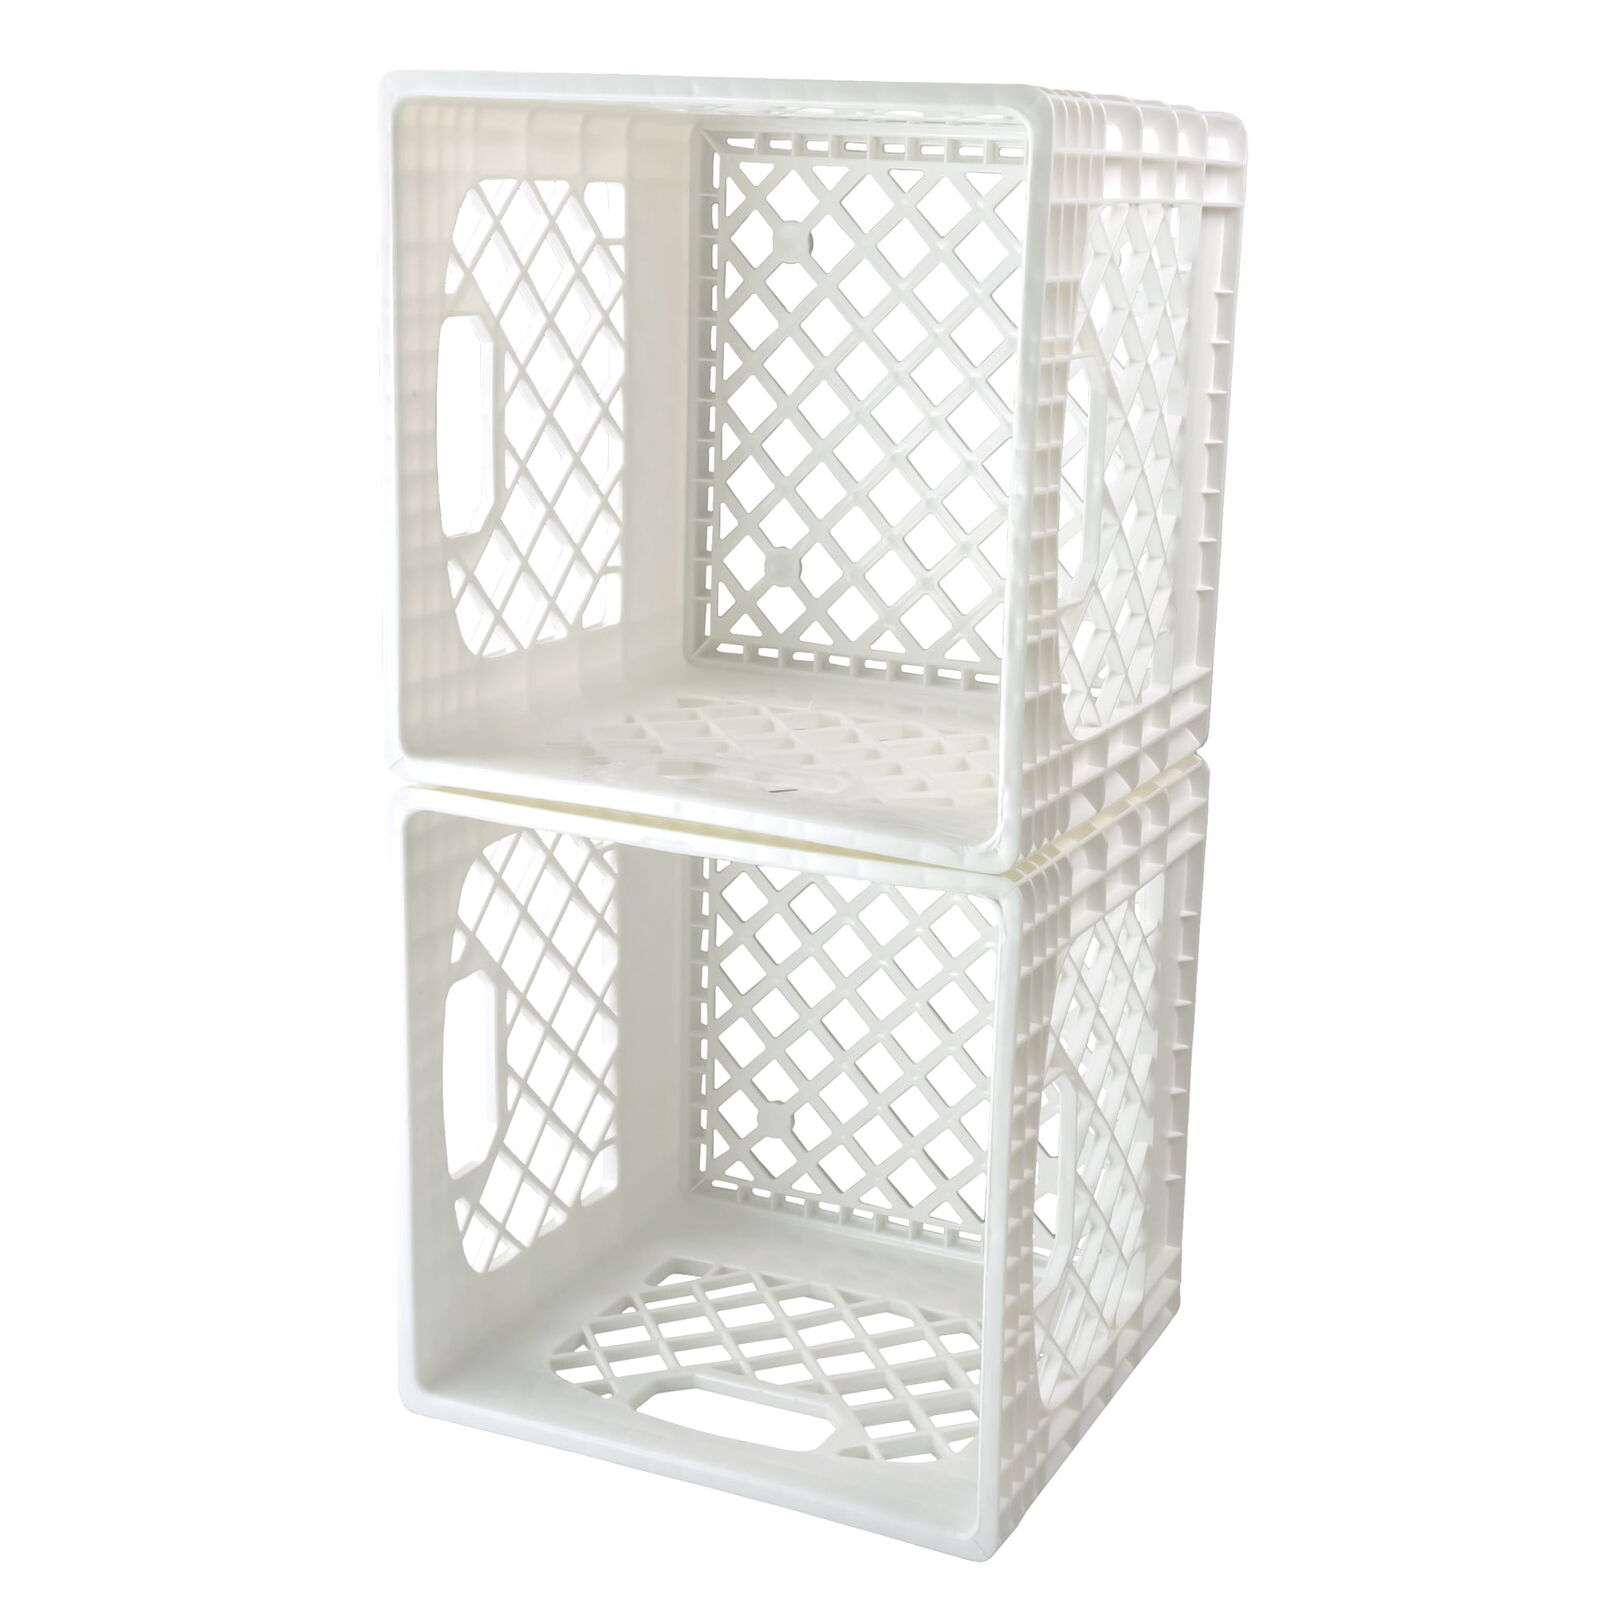 Pack of Two White Plastic Milk Crates